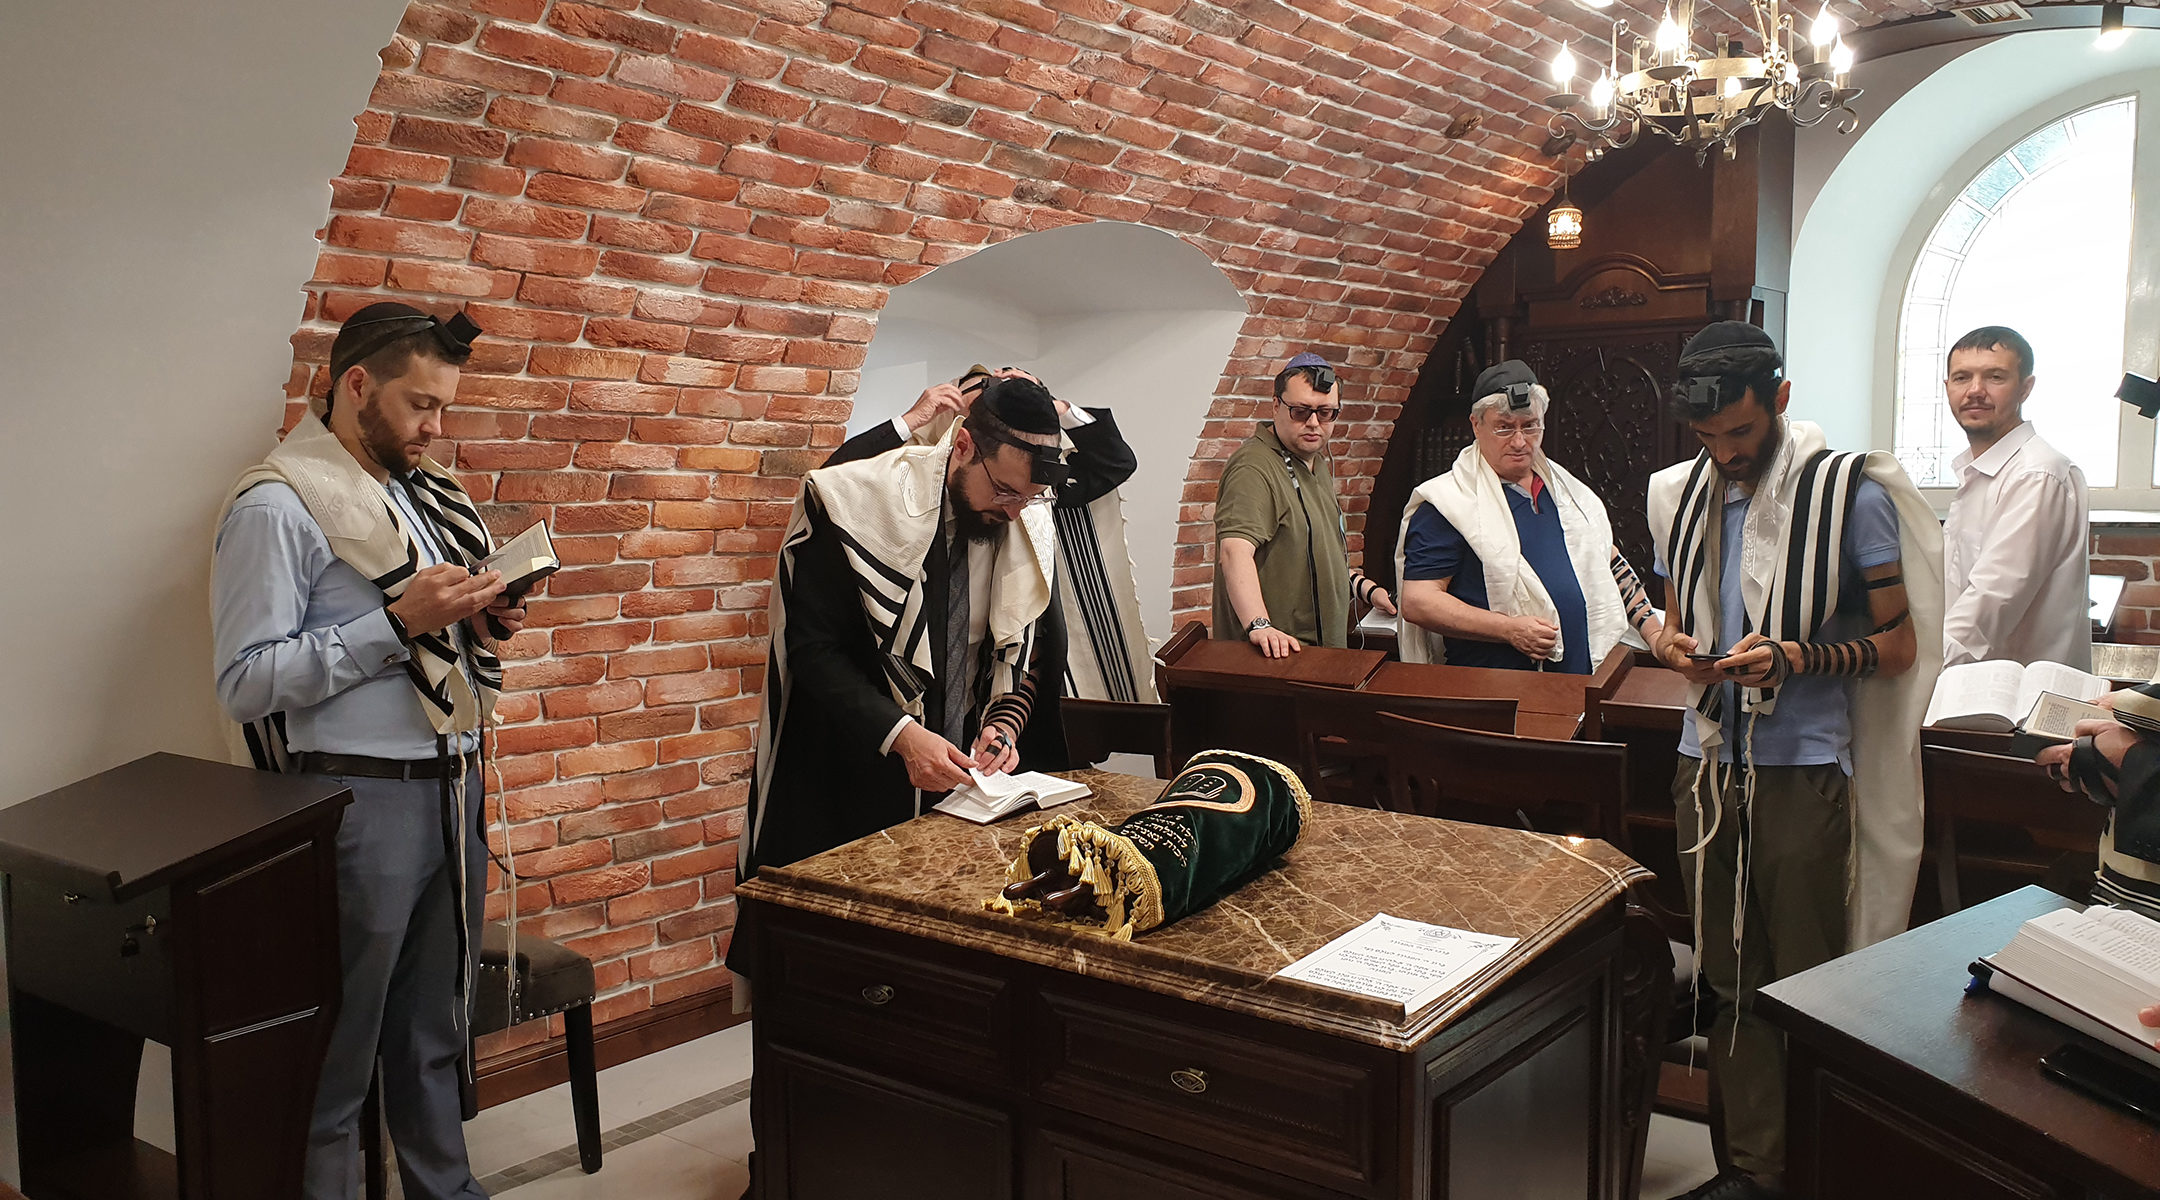 Rabbi Shimshon Izakson, second from left, praying with congregants at the Wooden Synagogue in Chisinau, Moldova on Aug. 26, 2019. (Cnaan Liphshiz)